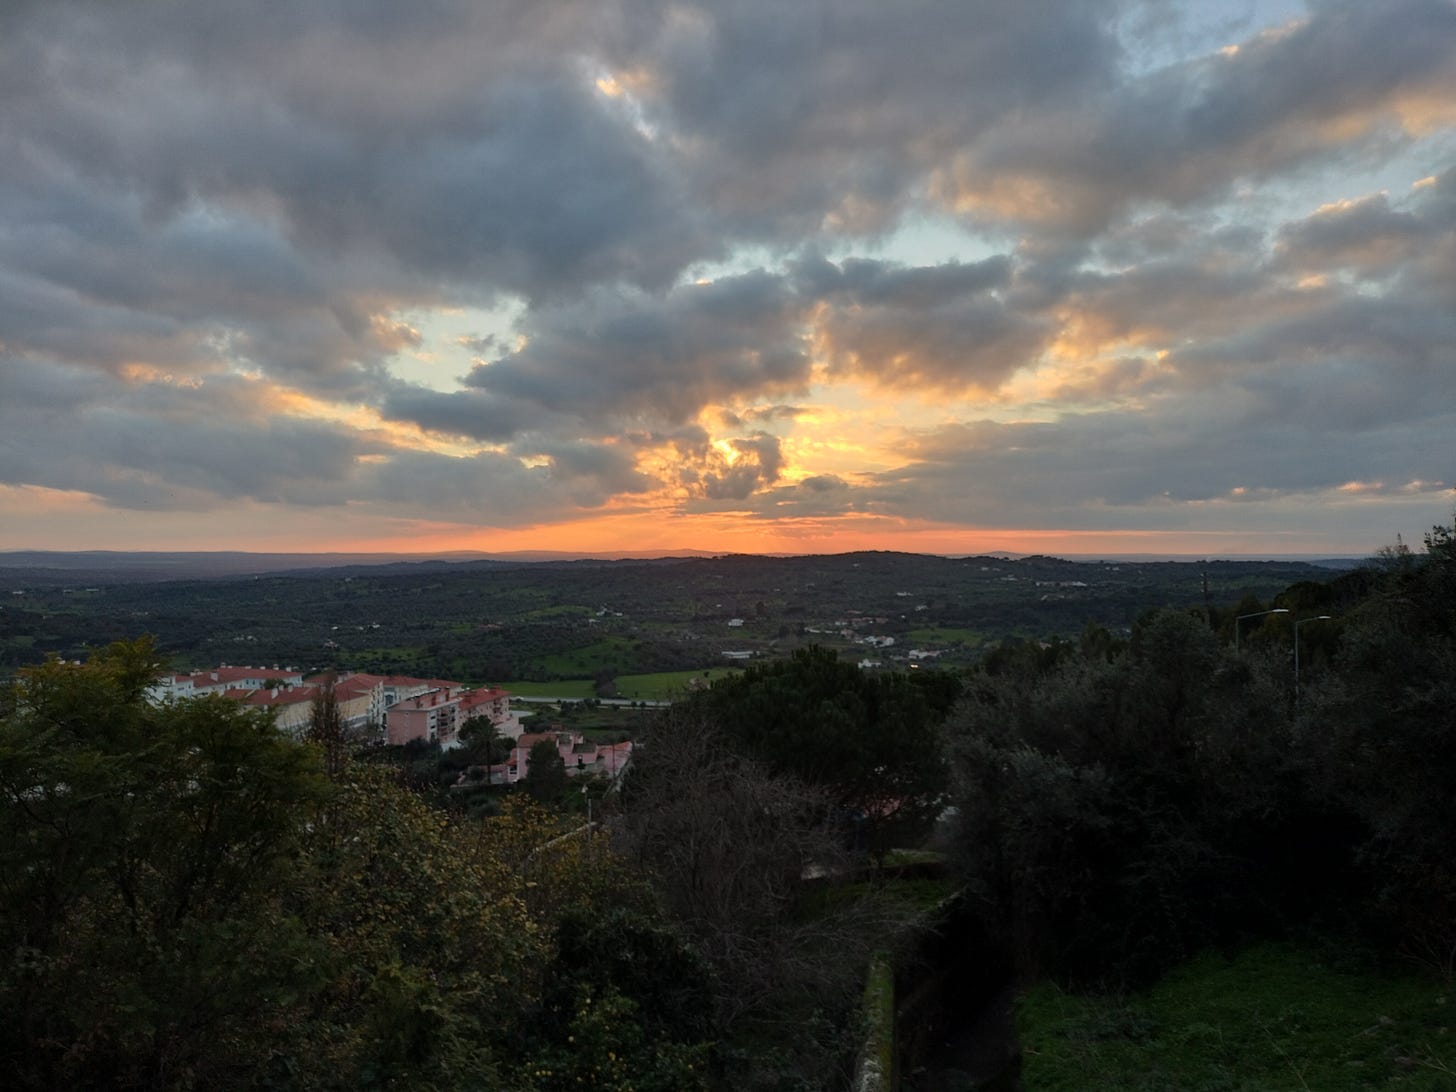 a cloudy sunset viwed from Portalegre, looking south from the edge of the city